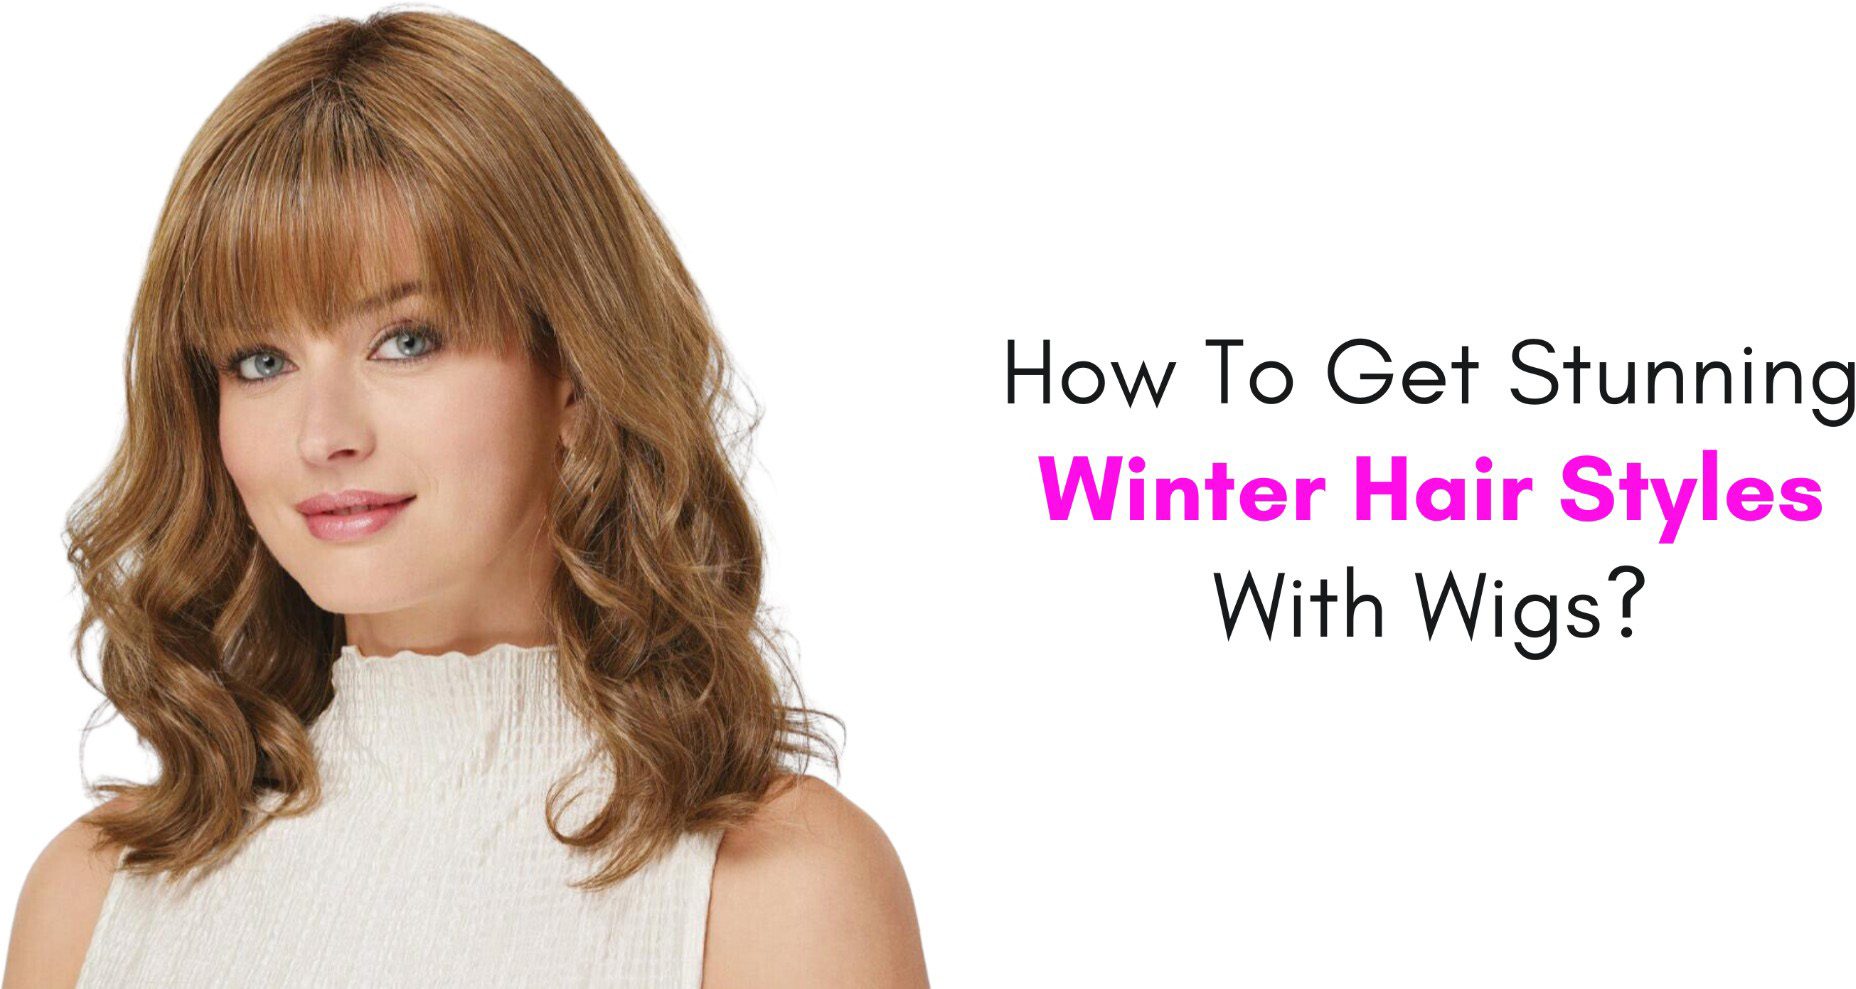 How To Get Stunning Winter Hair Styles With Wigs?